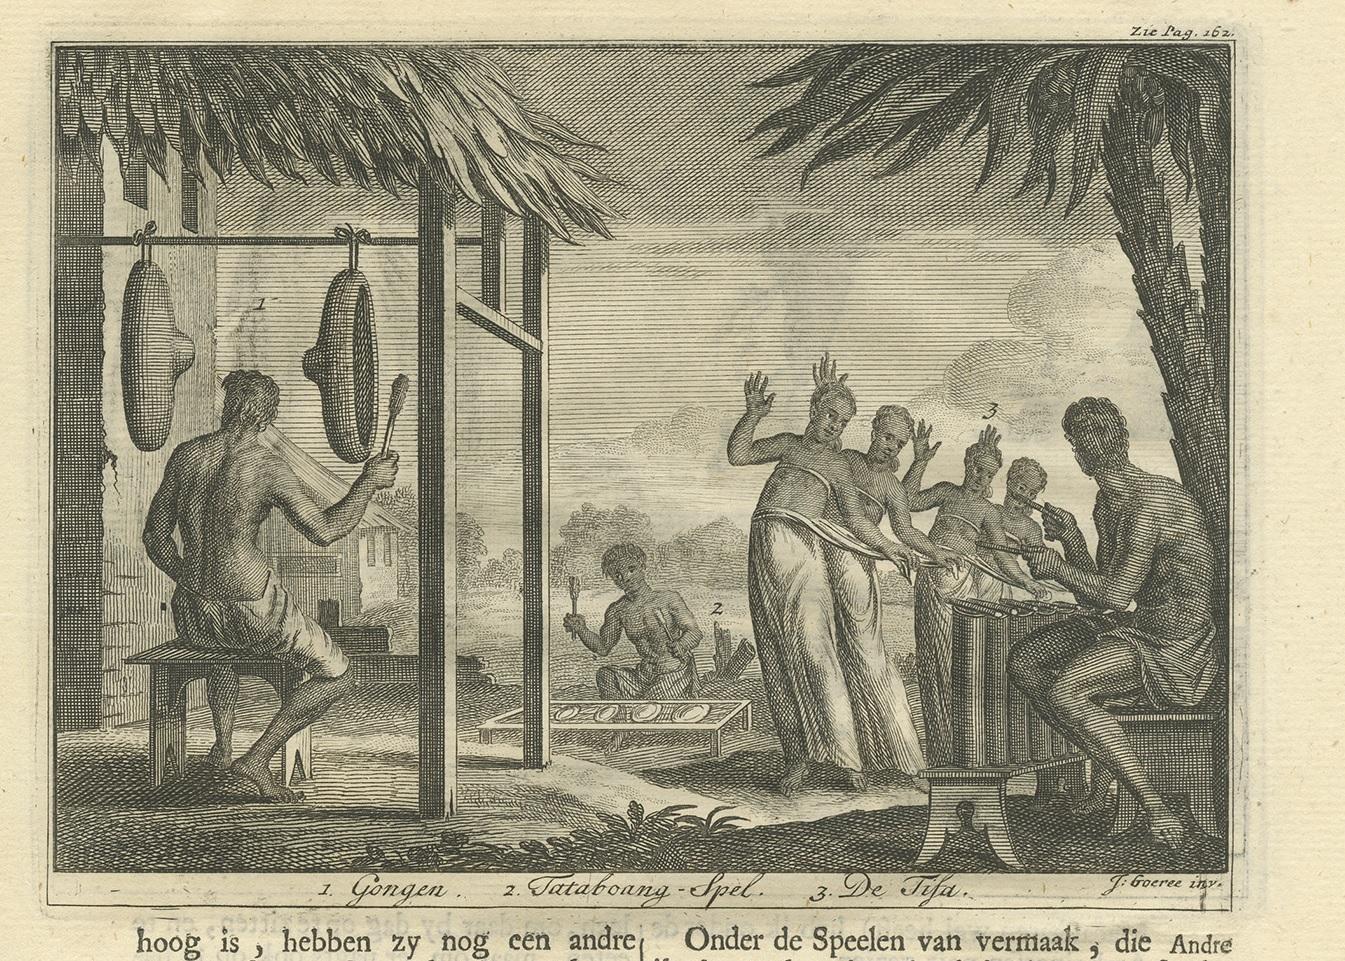 Antique print of various music instruments from Ambon, Indonesia. On verso, image of shoes. This print originates from 'Oud en Nieuw Oost-Indiën' by F. Valentijn.